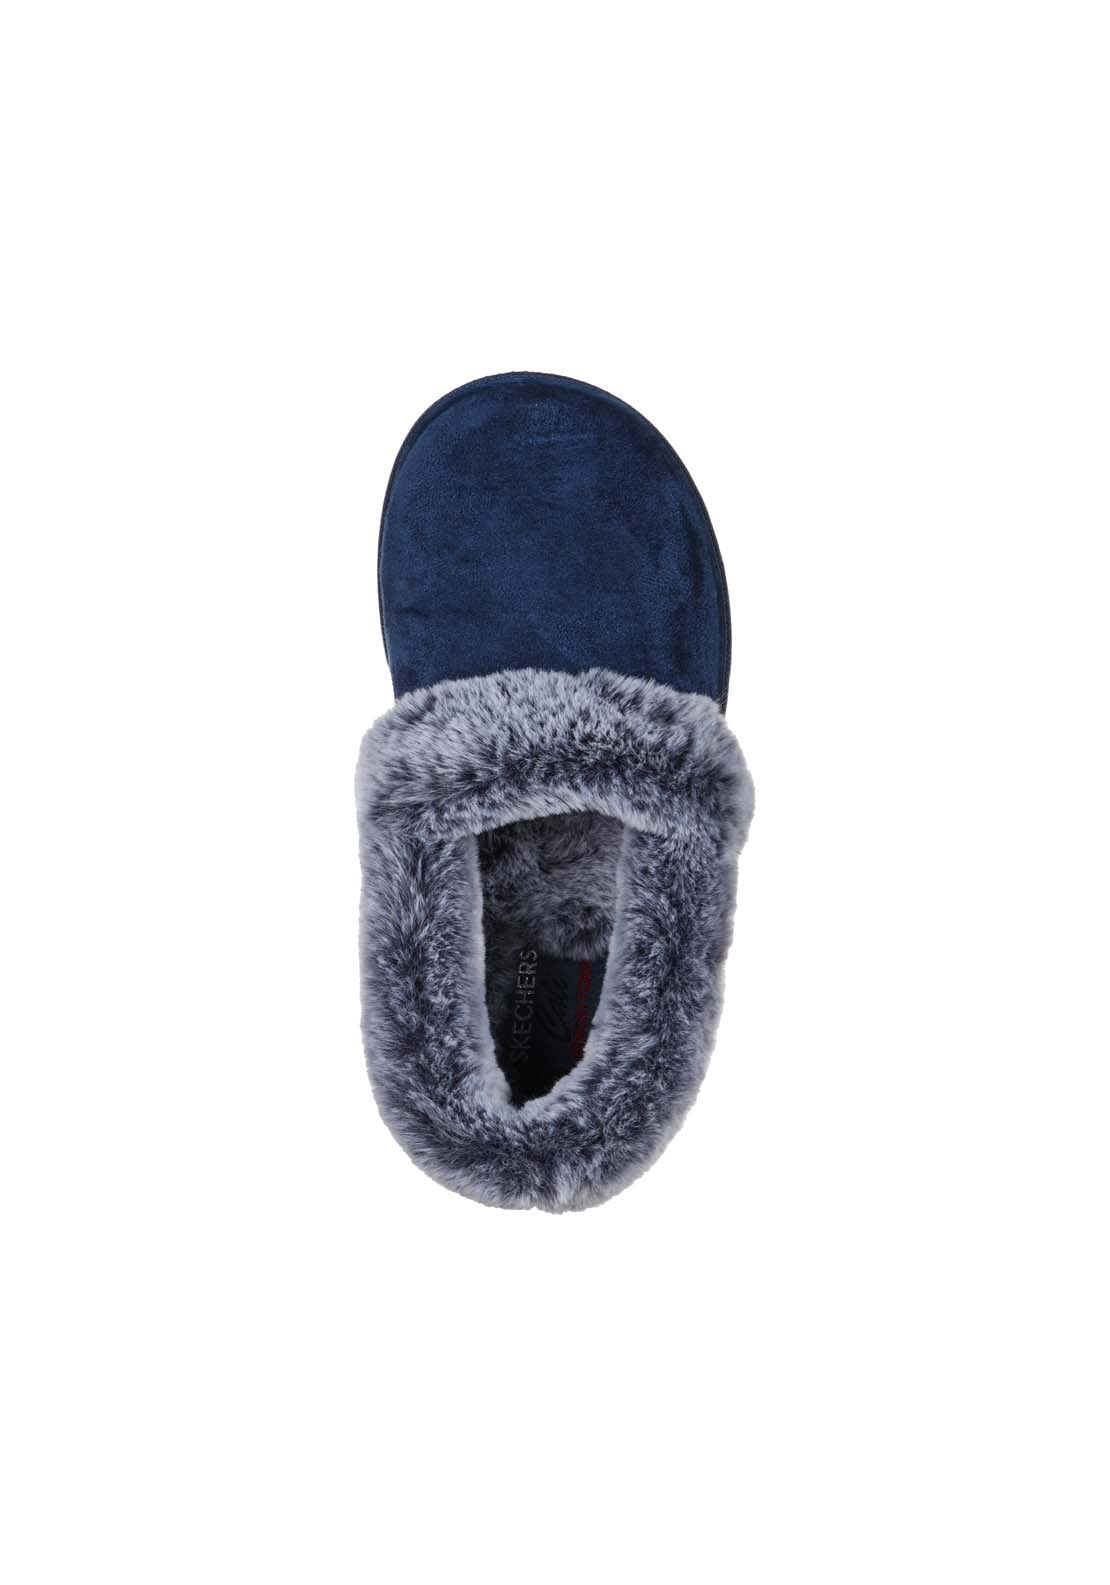 Skechers Cosy Campfire Slipper - Navy 2 Shaws Department Stores